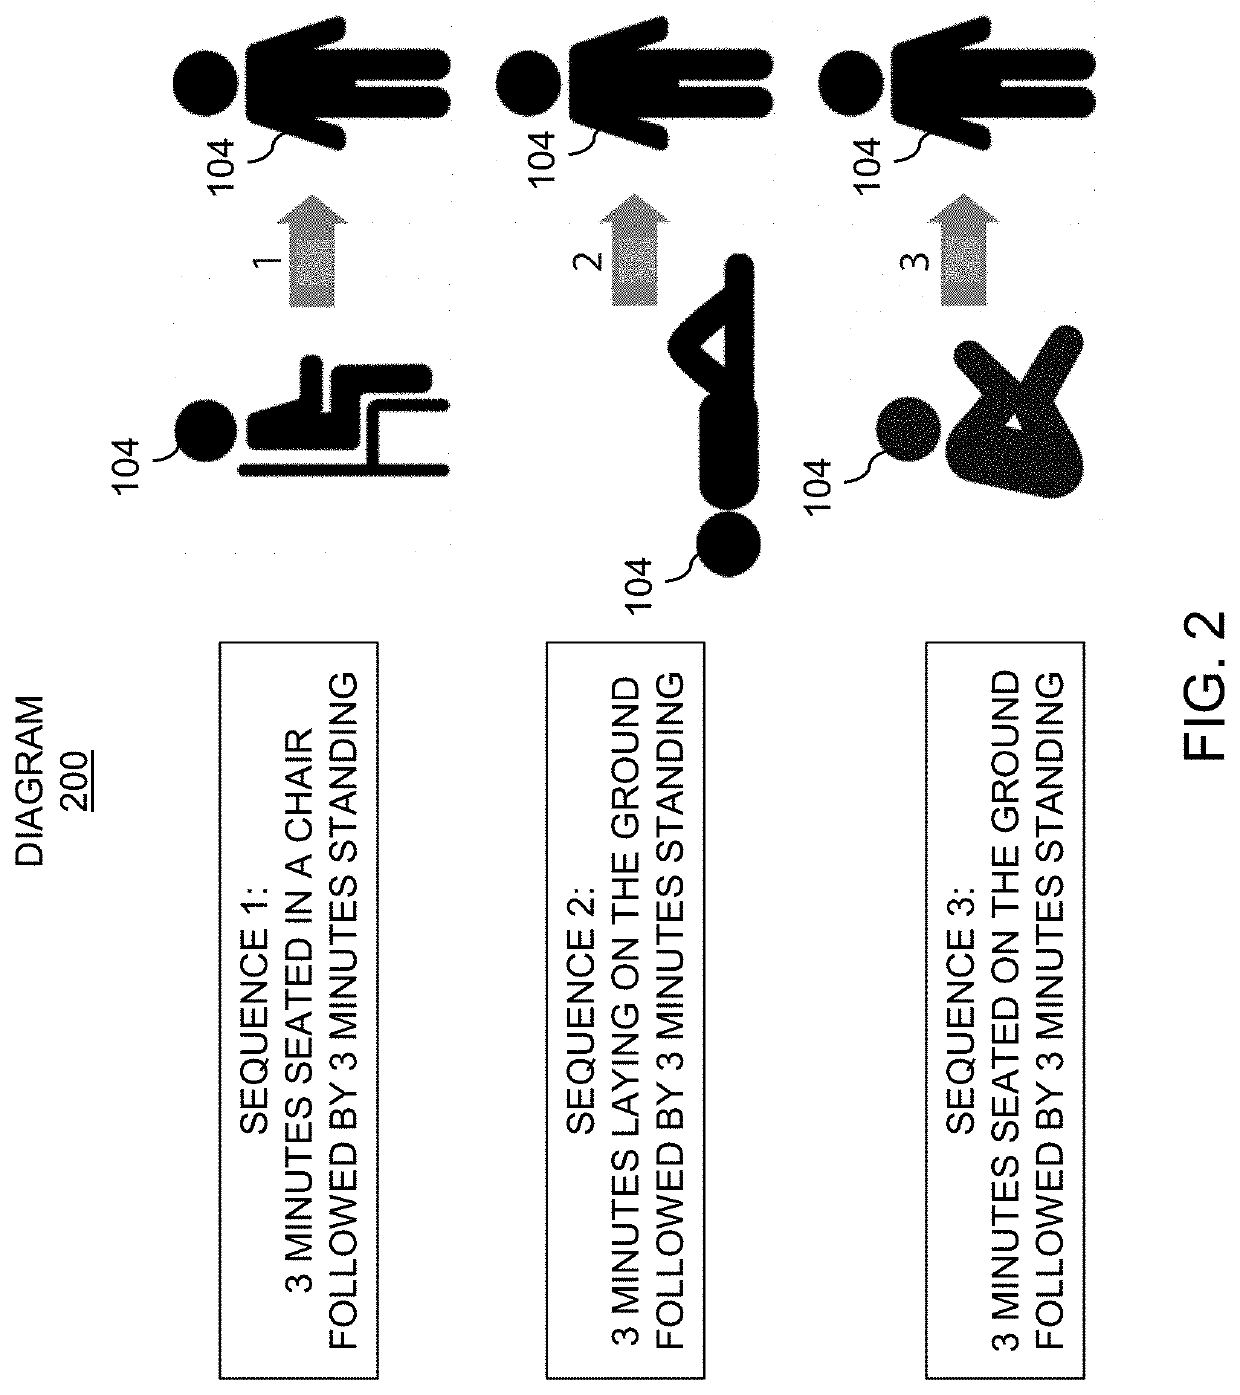 Systems, methods, and devices for determining mild traumatic brain injuries